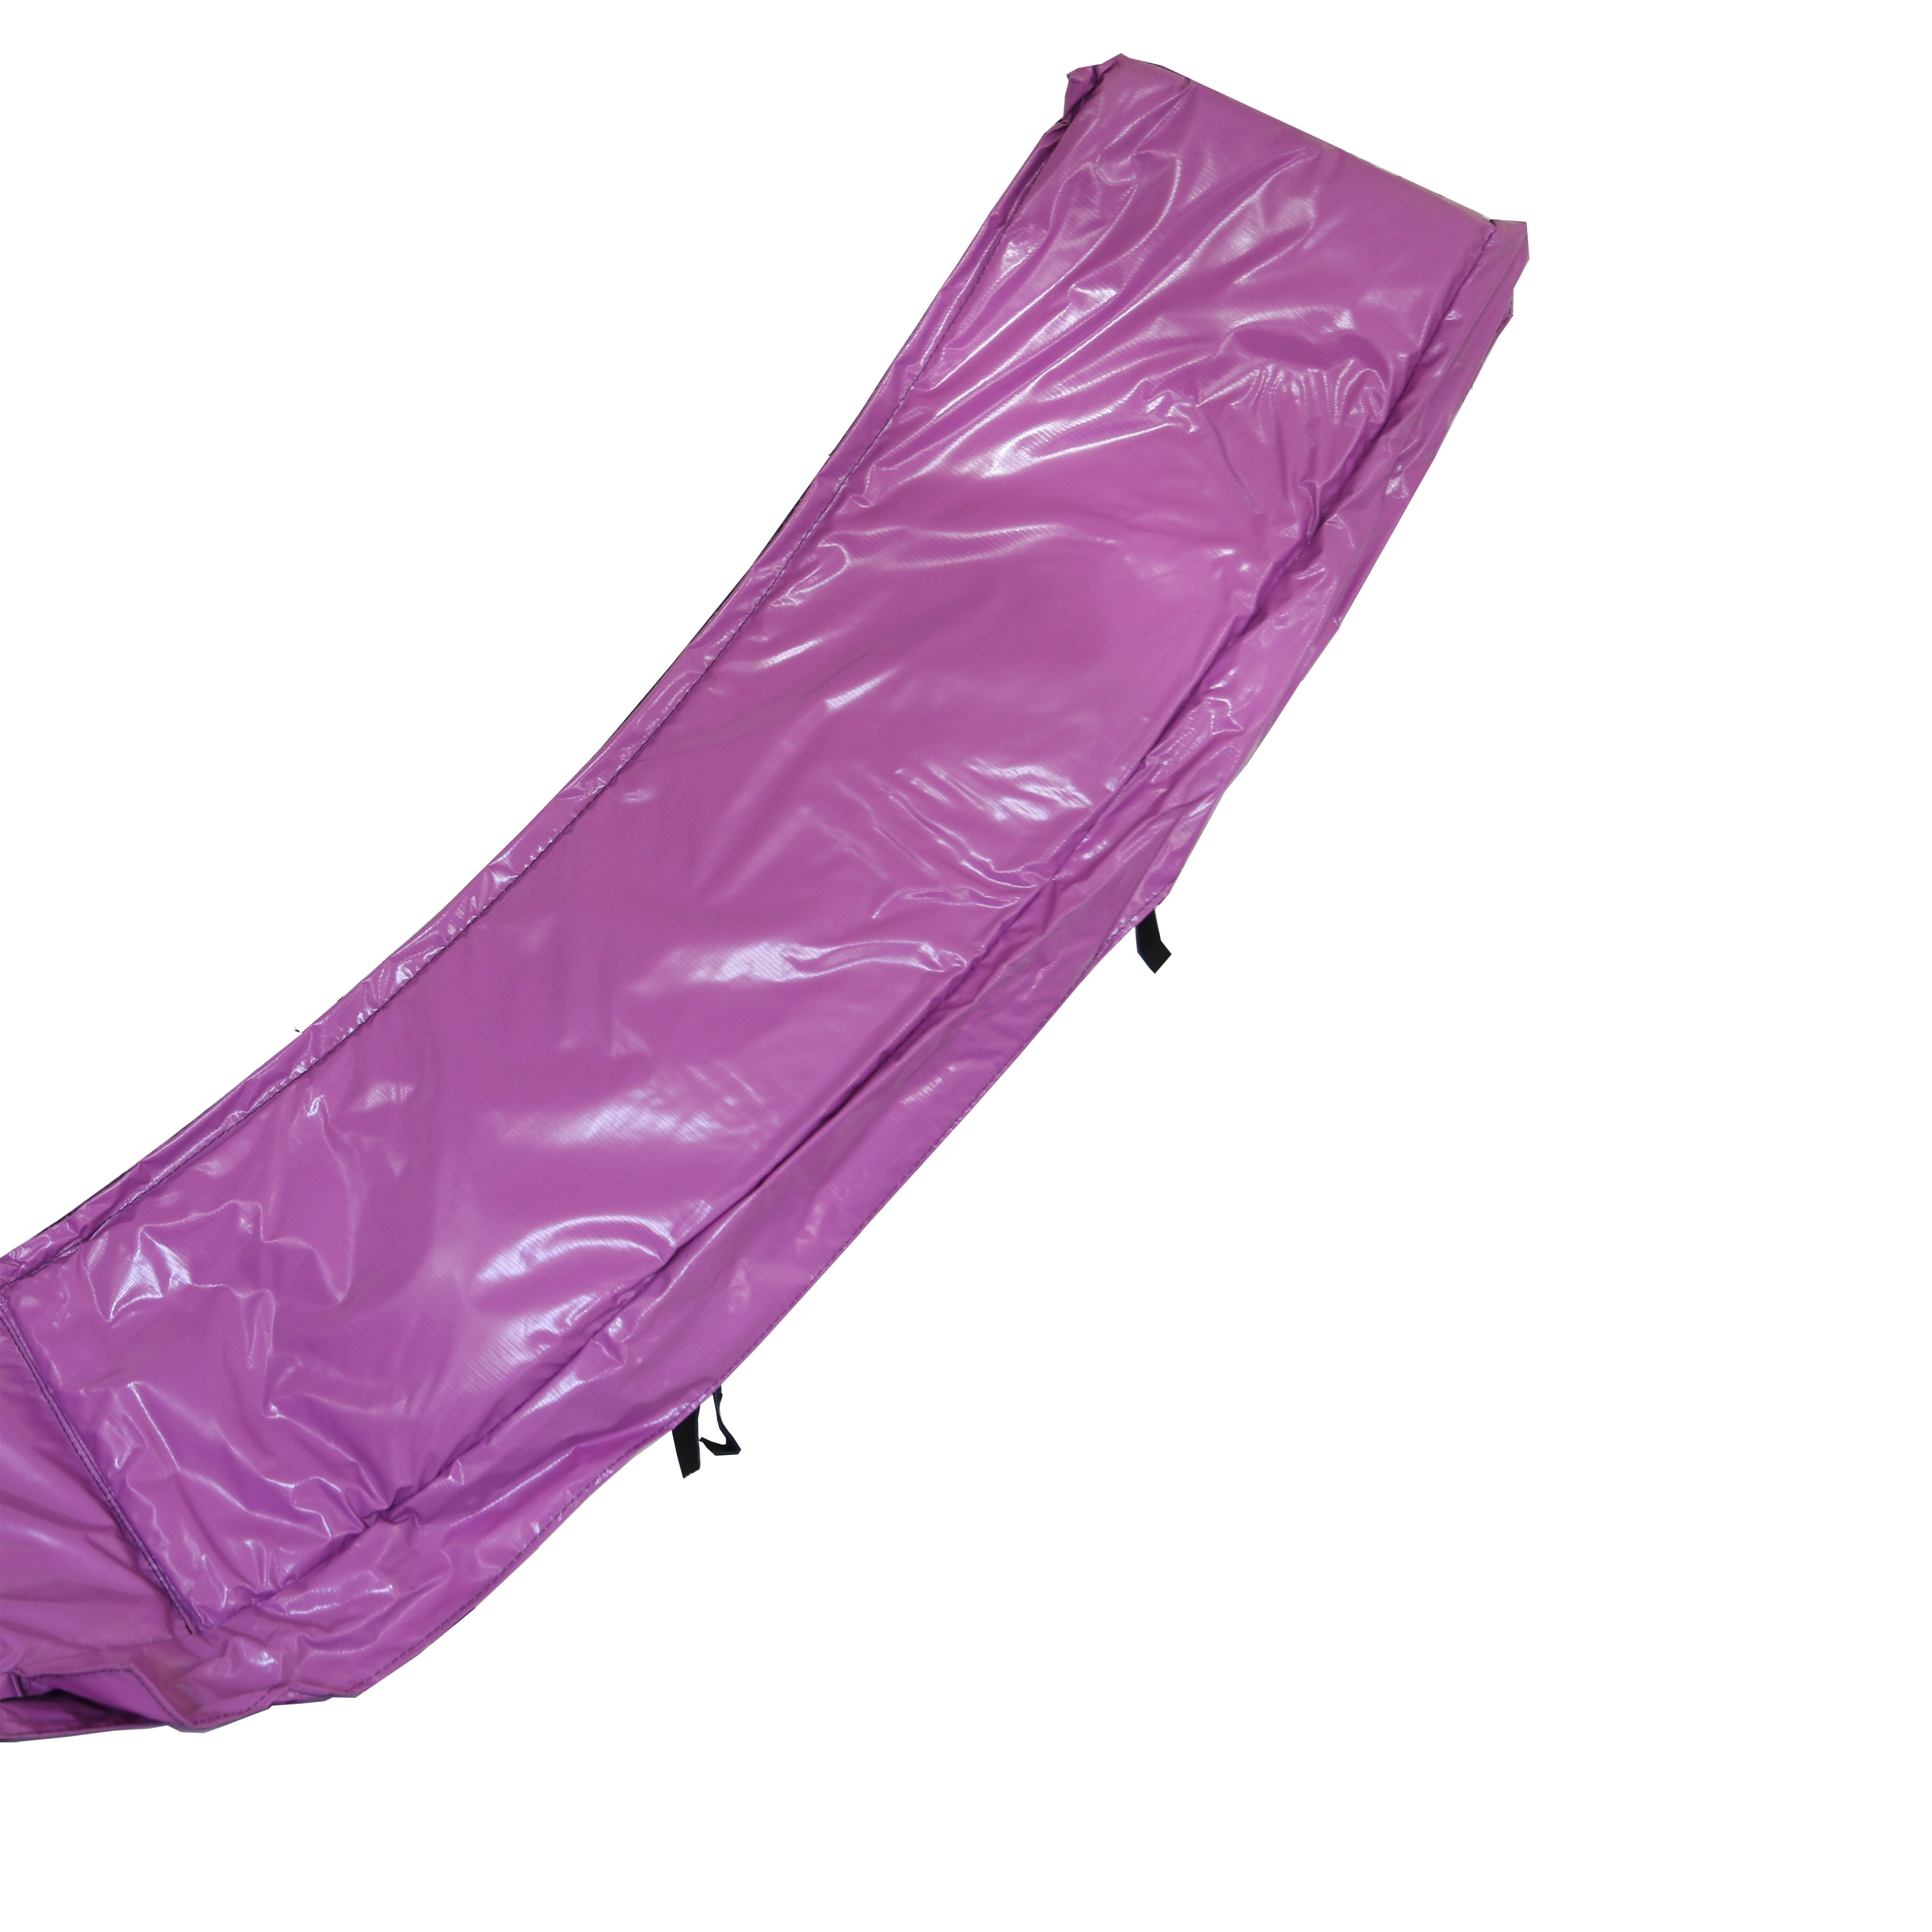 Purple spring pad designed for 17-foot oval trampolines. 